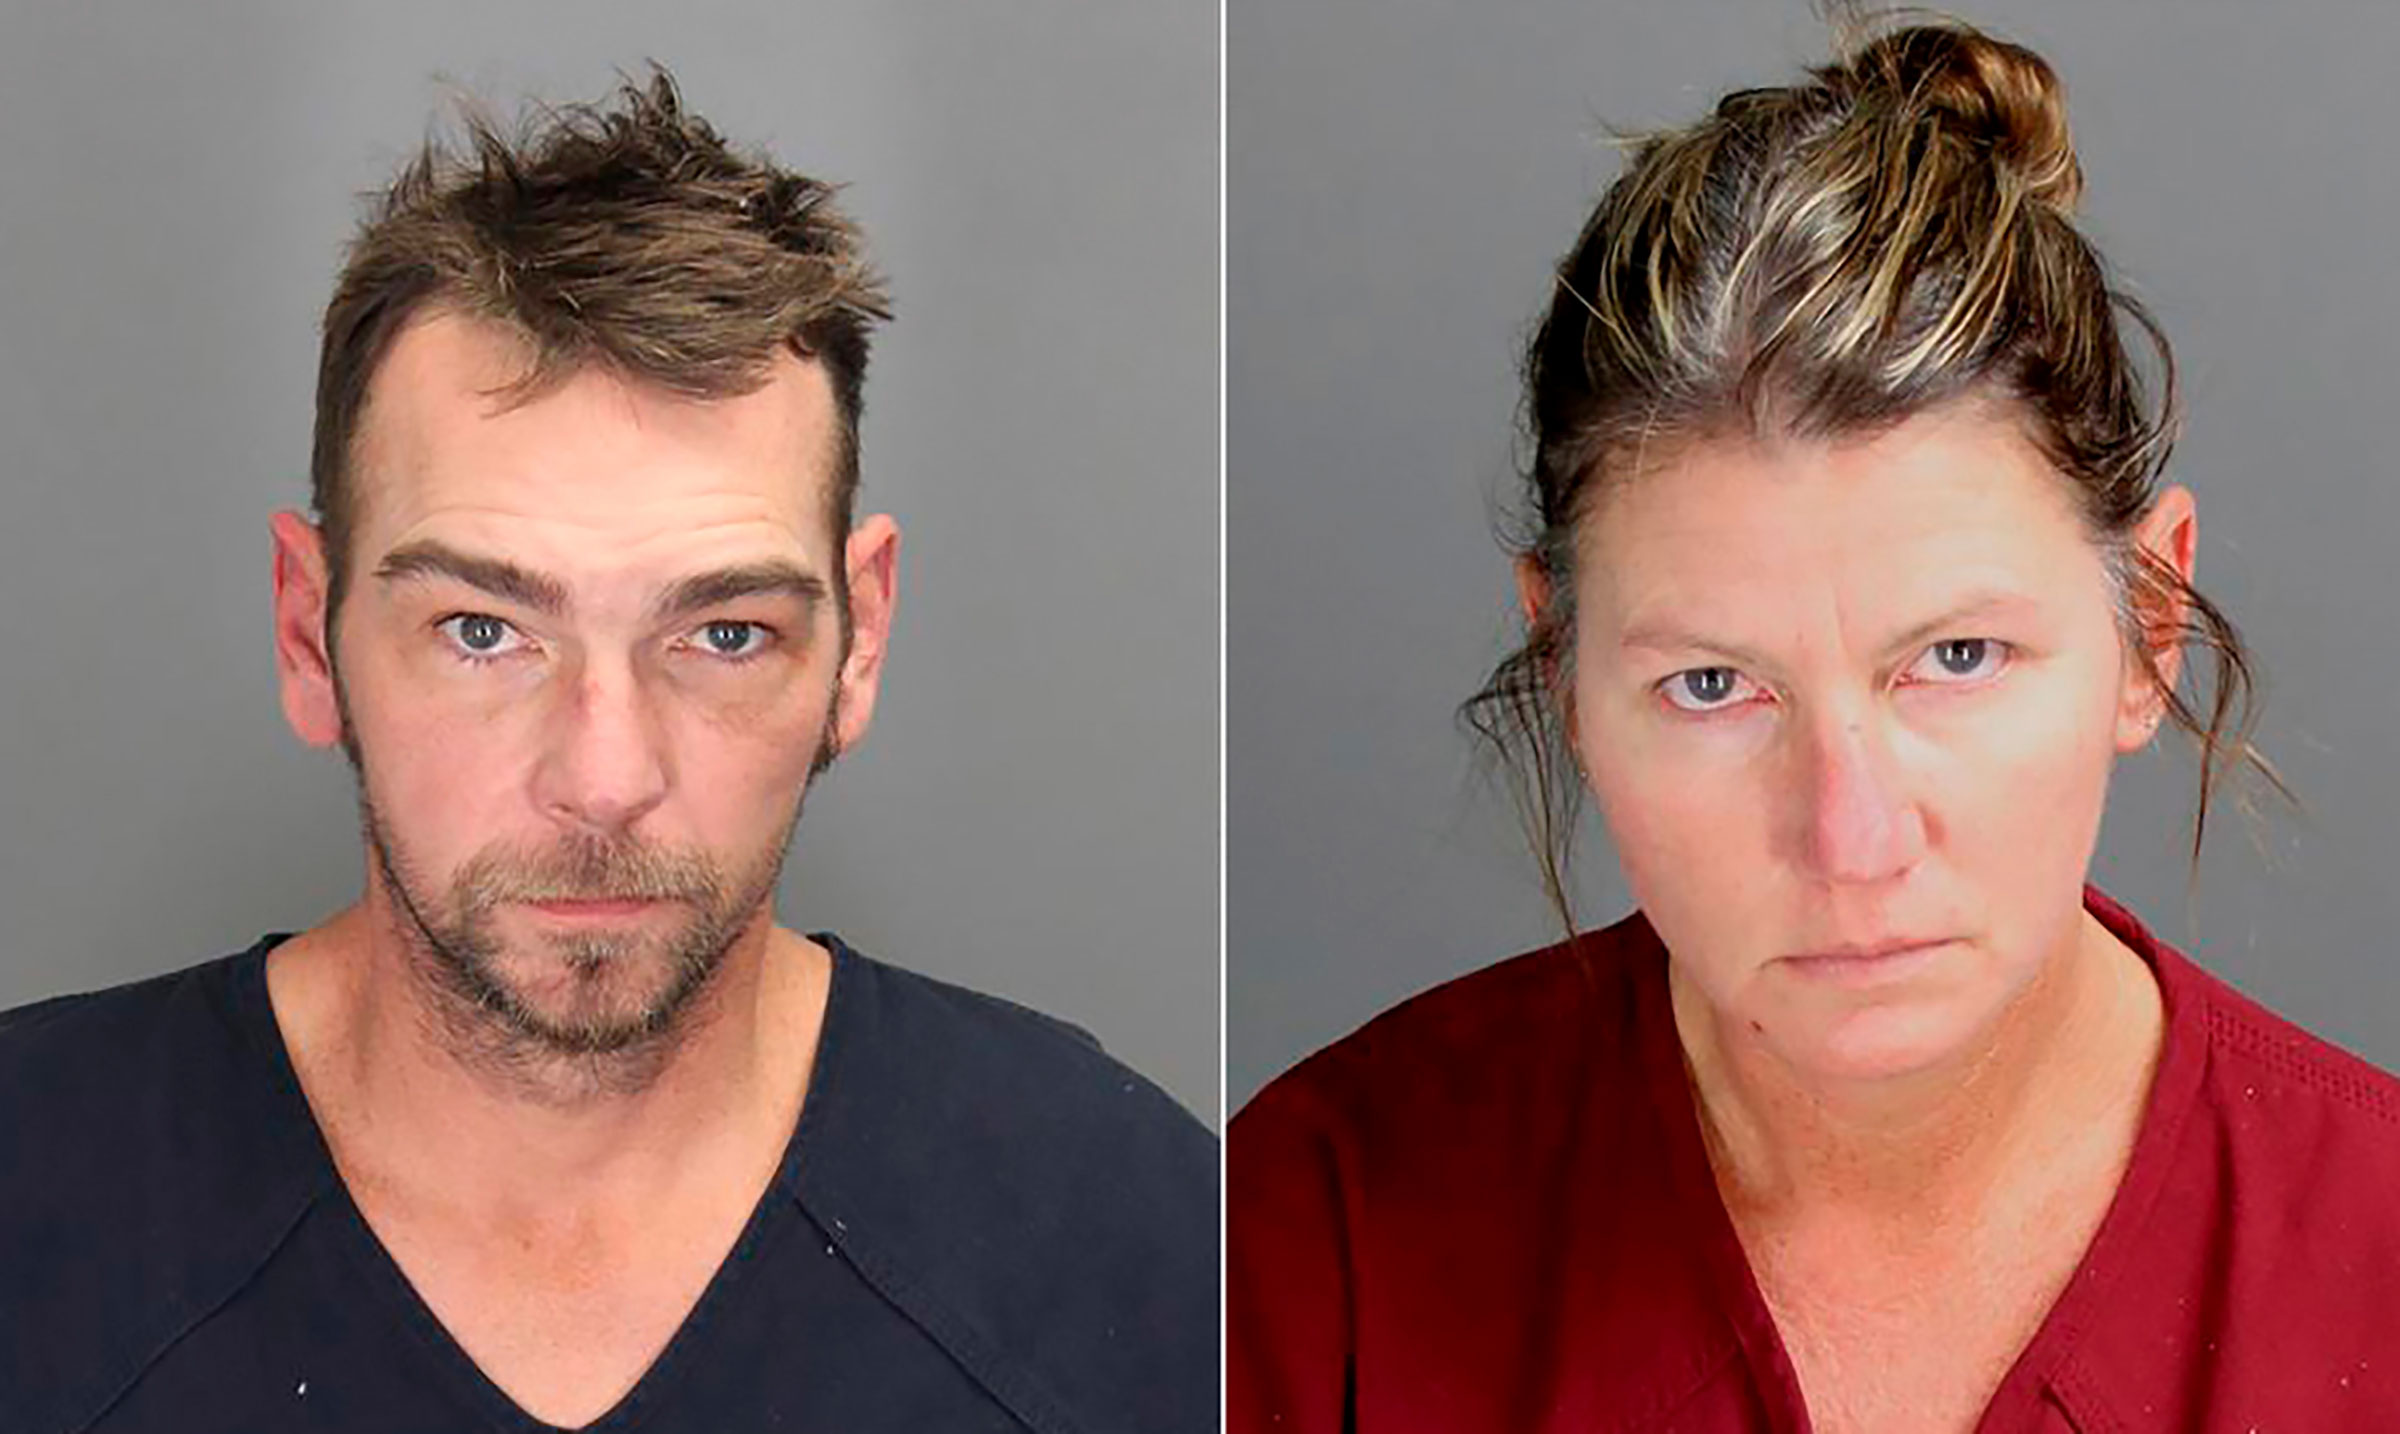 James Crumbley and Jennifer Crumbley, parents of accused Oxford, Michigan school shooter Ethan Crumbley. (Oakland County Sheriff's office via AP)